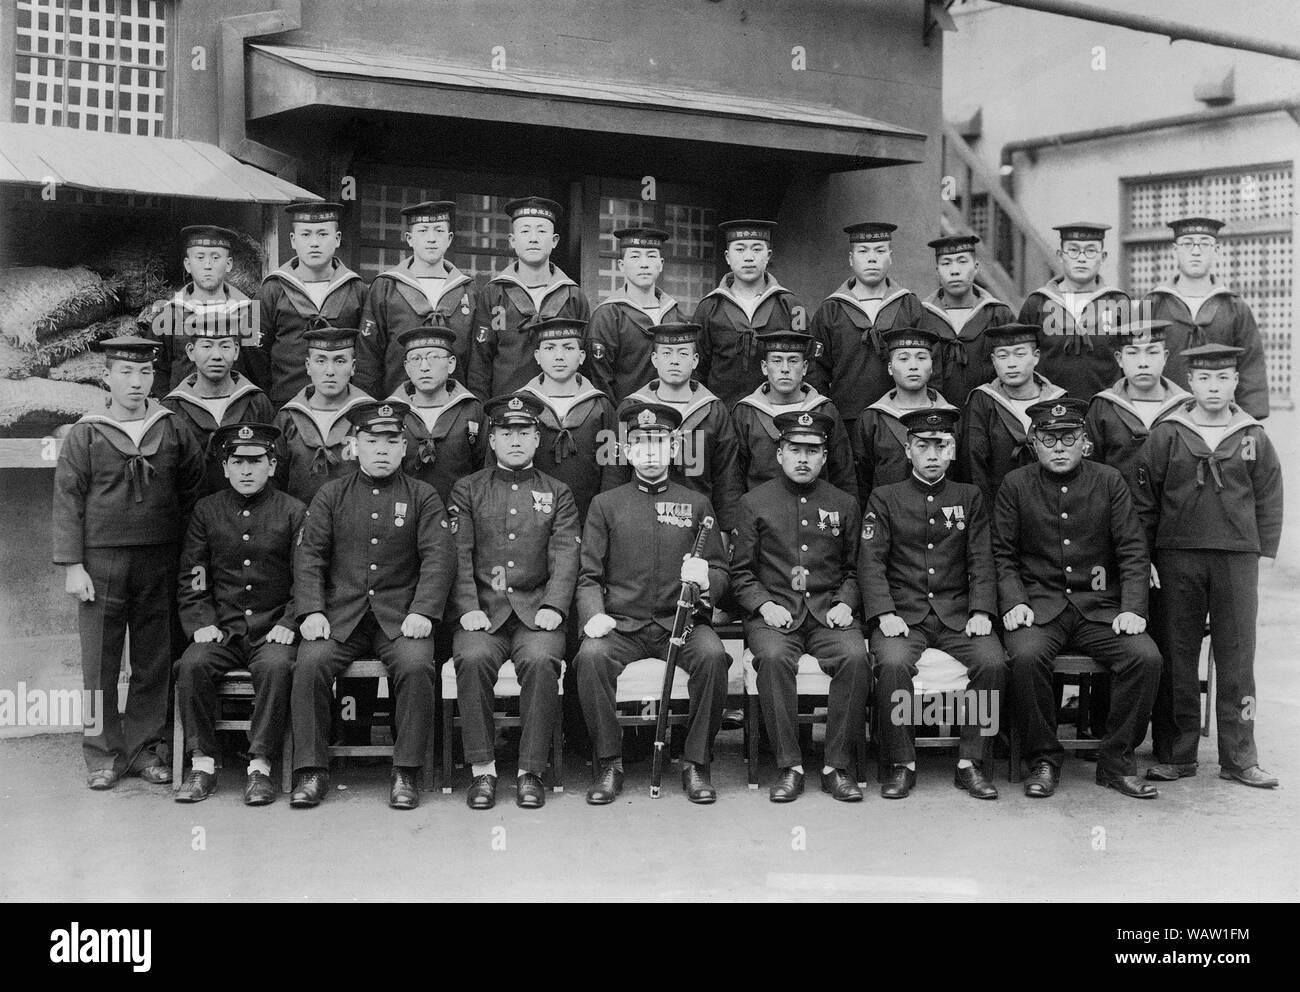 [ 1920s Japan - Japanese Navy Cadets ] —   Uniformed cadets and officers of the Imperial Japanese Navy in Yokosuka, Kanagawa.  Based on the insignia, this was photographed in November 1942 at the earliest.  20th century vintage gelatin silver print. Stock Photo